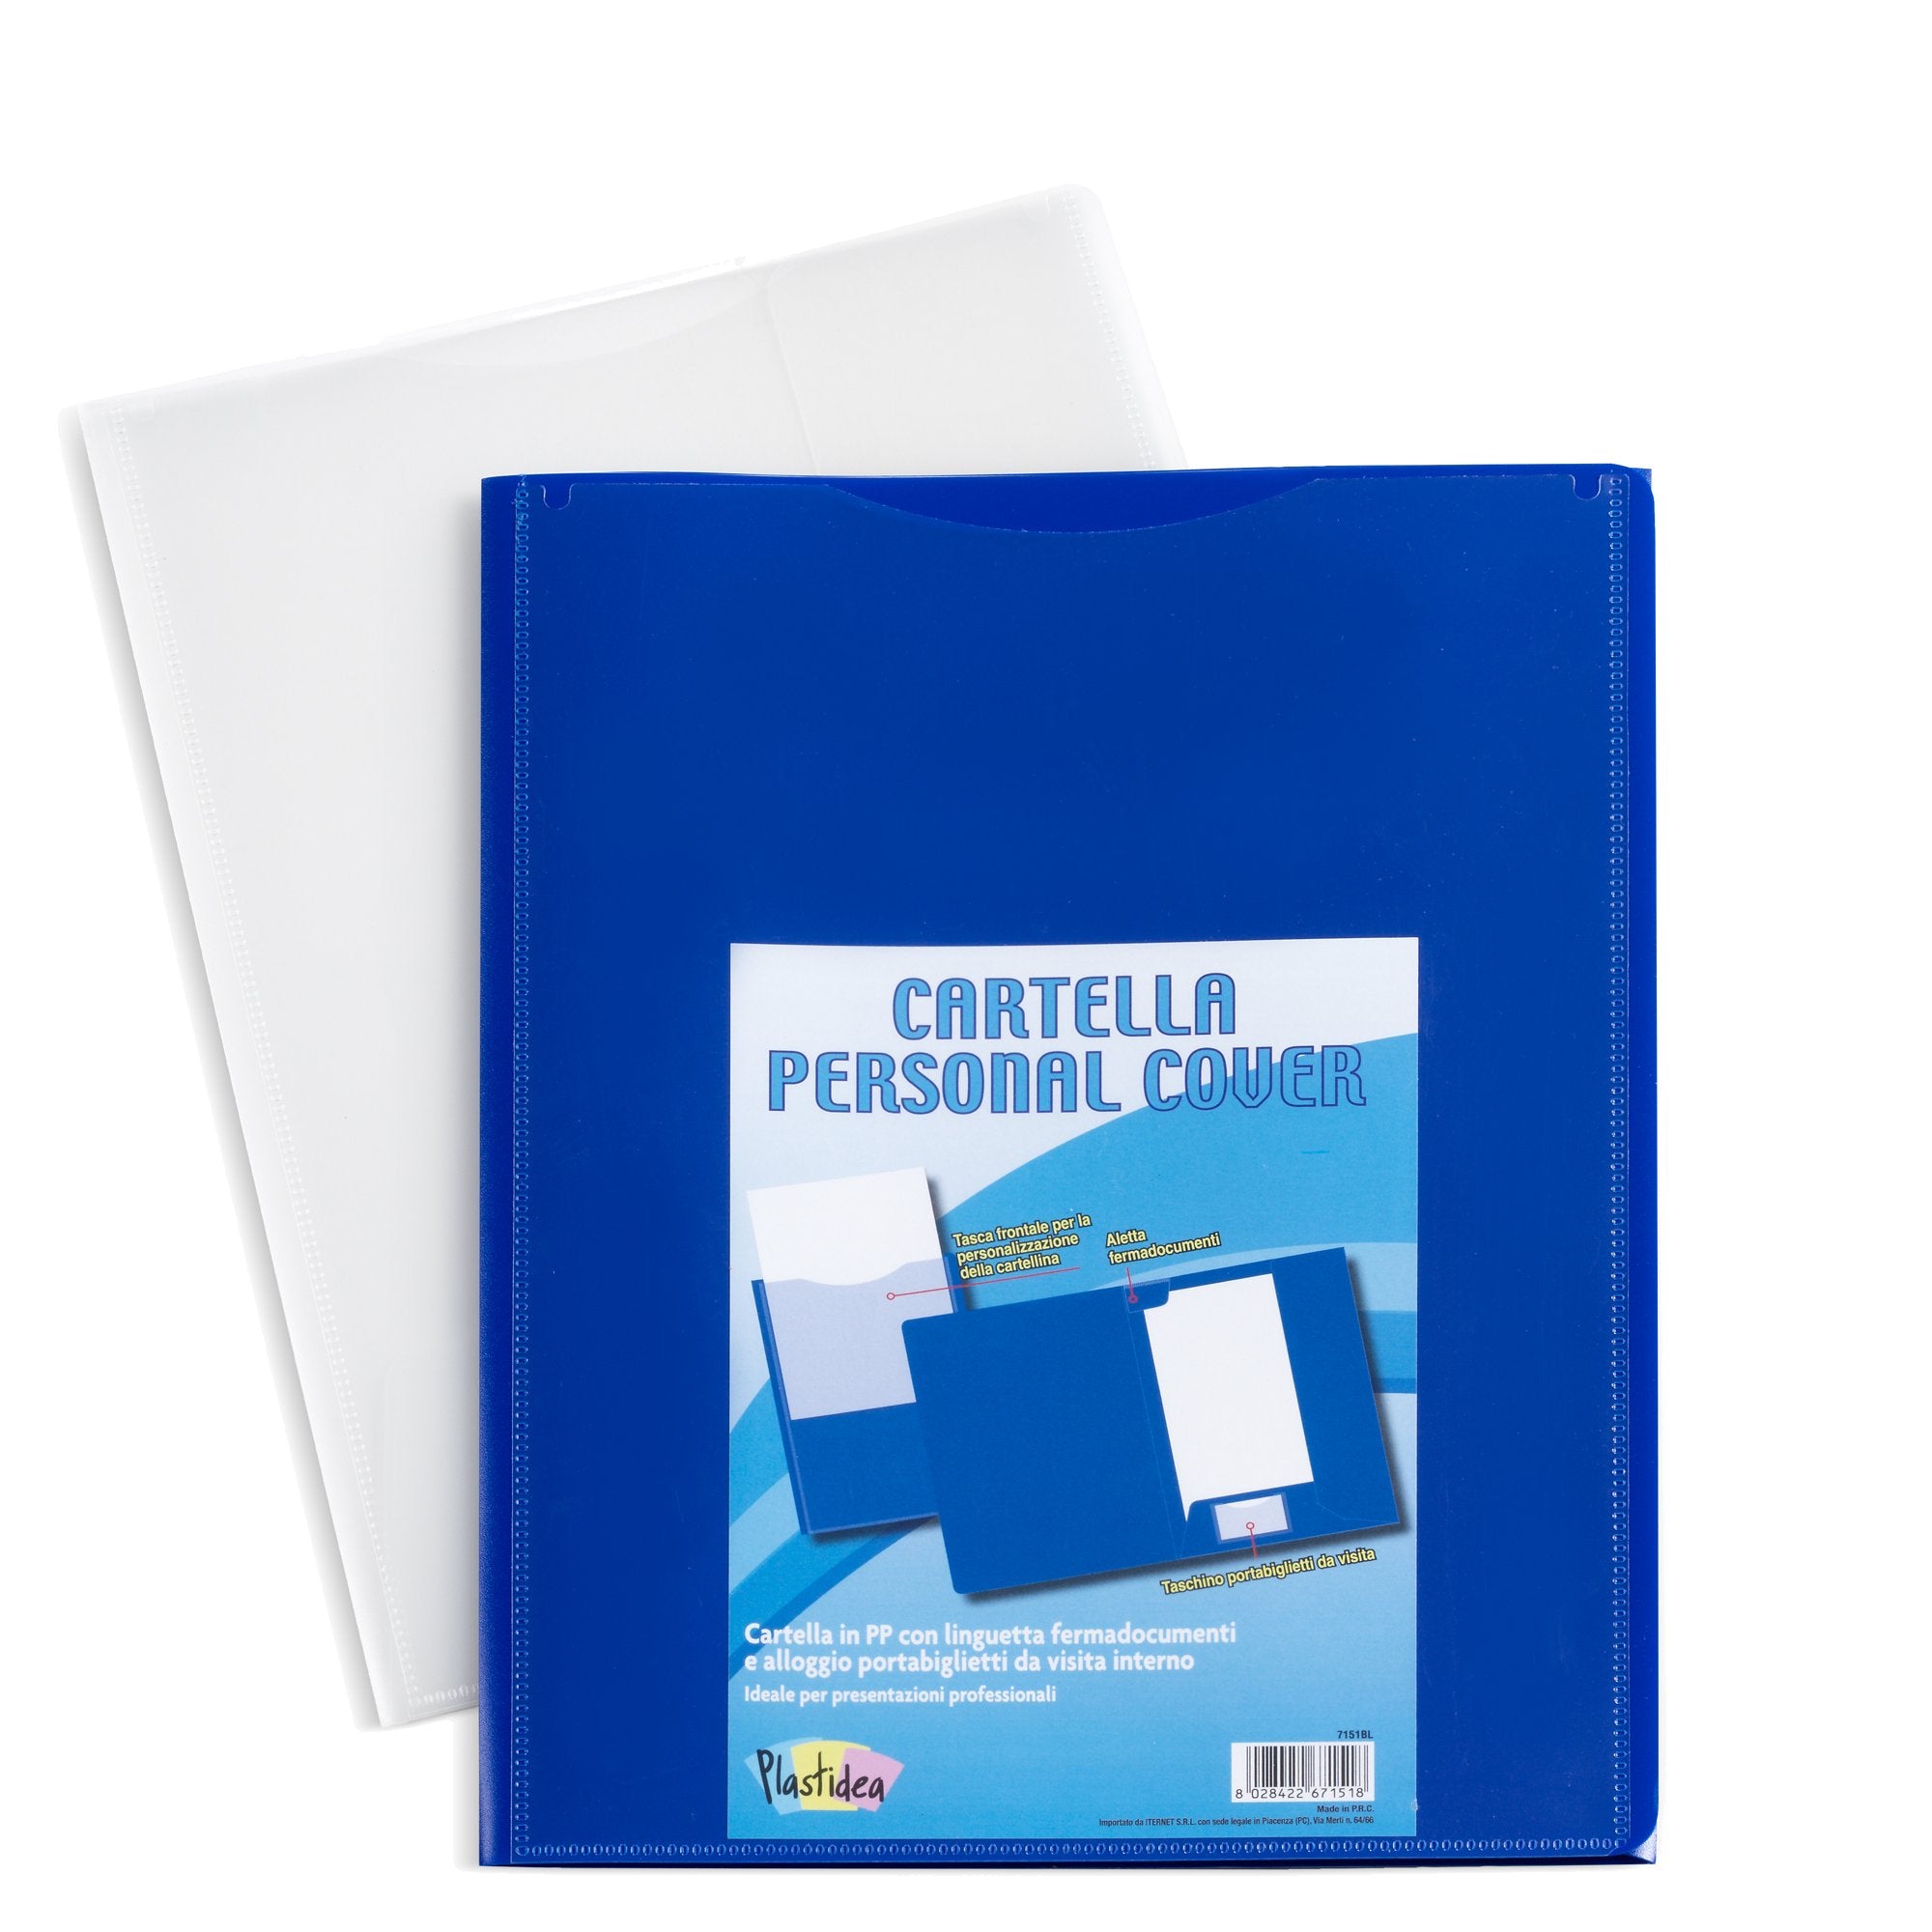 turikan-conf-5-cartelle-pp-personal-cover-blu-240x320mm-iternet